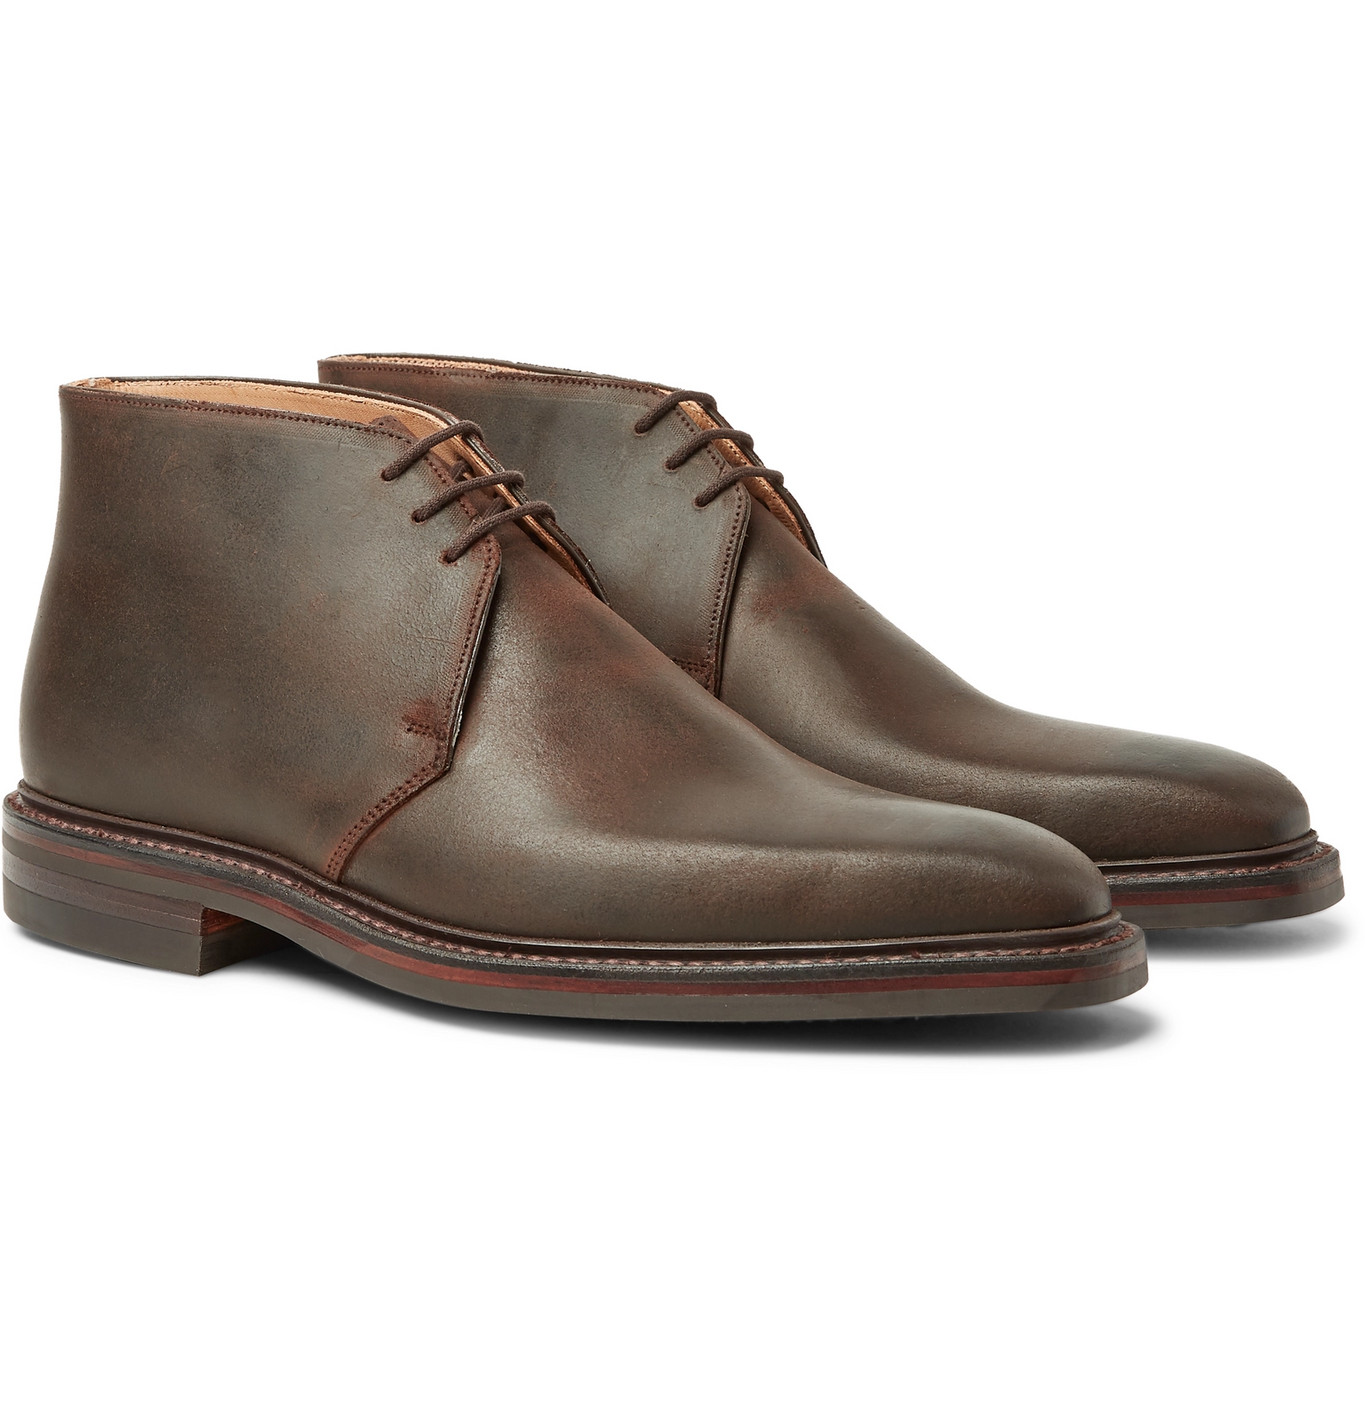 George Cleverley - Nathan Distressed Leather Chukka Boots - Men - Brown ...